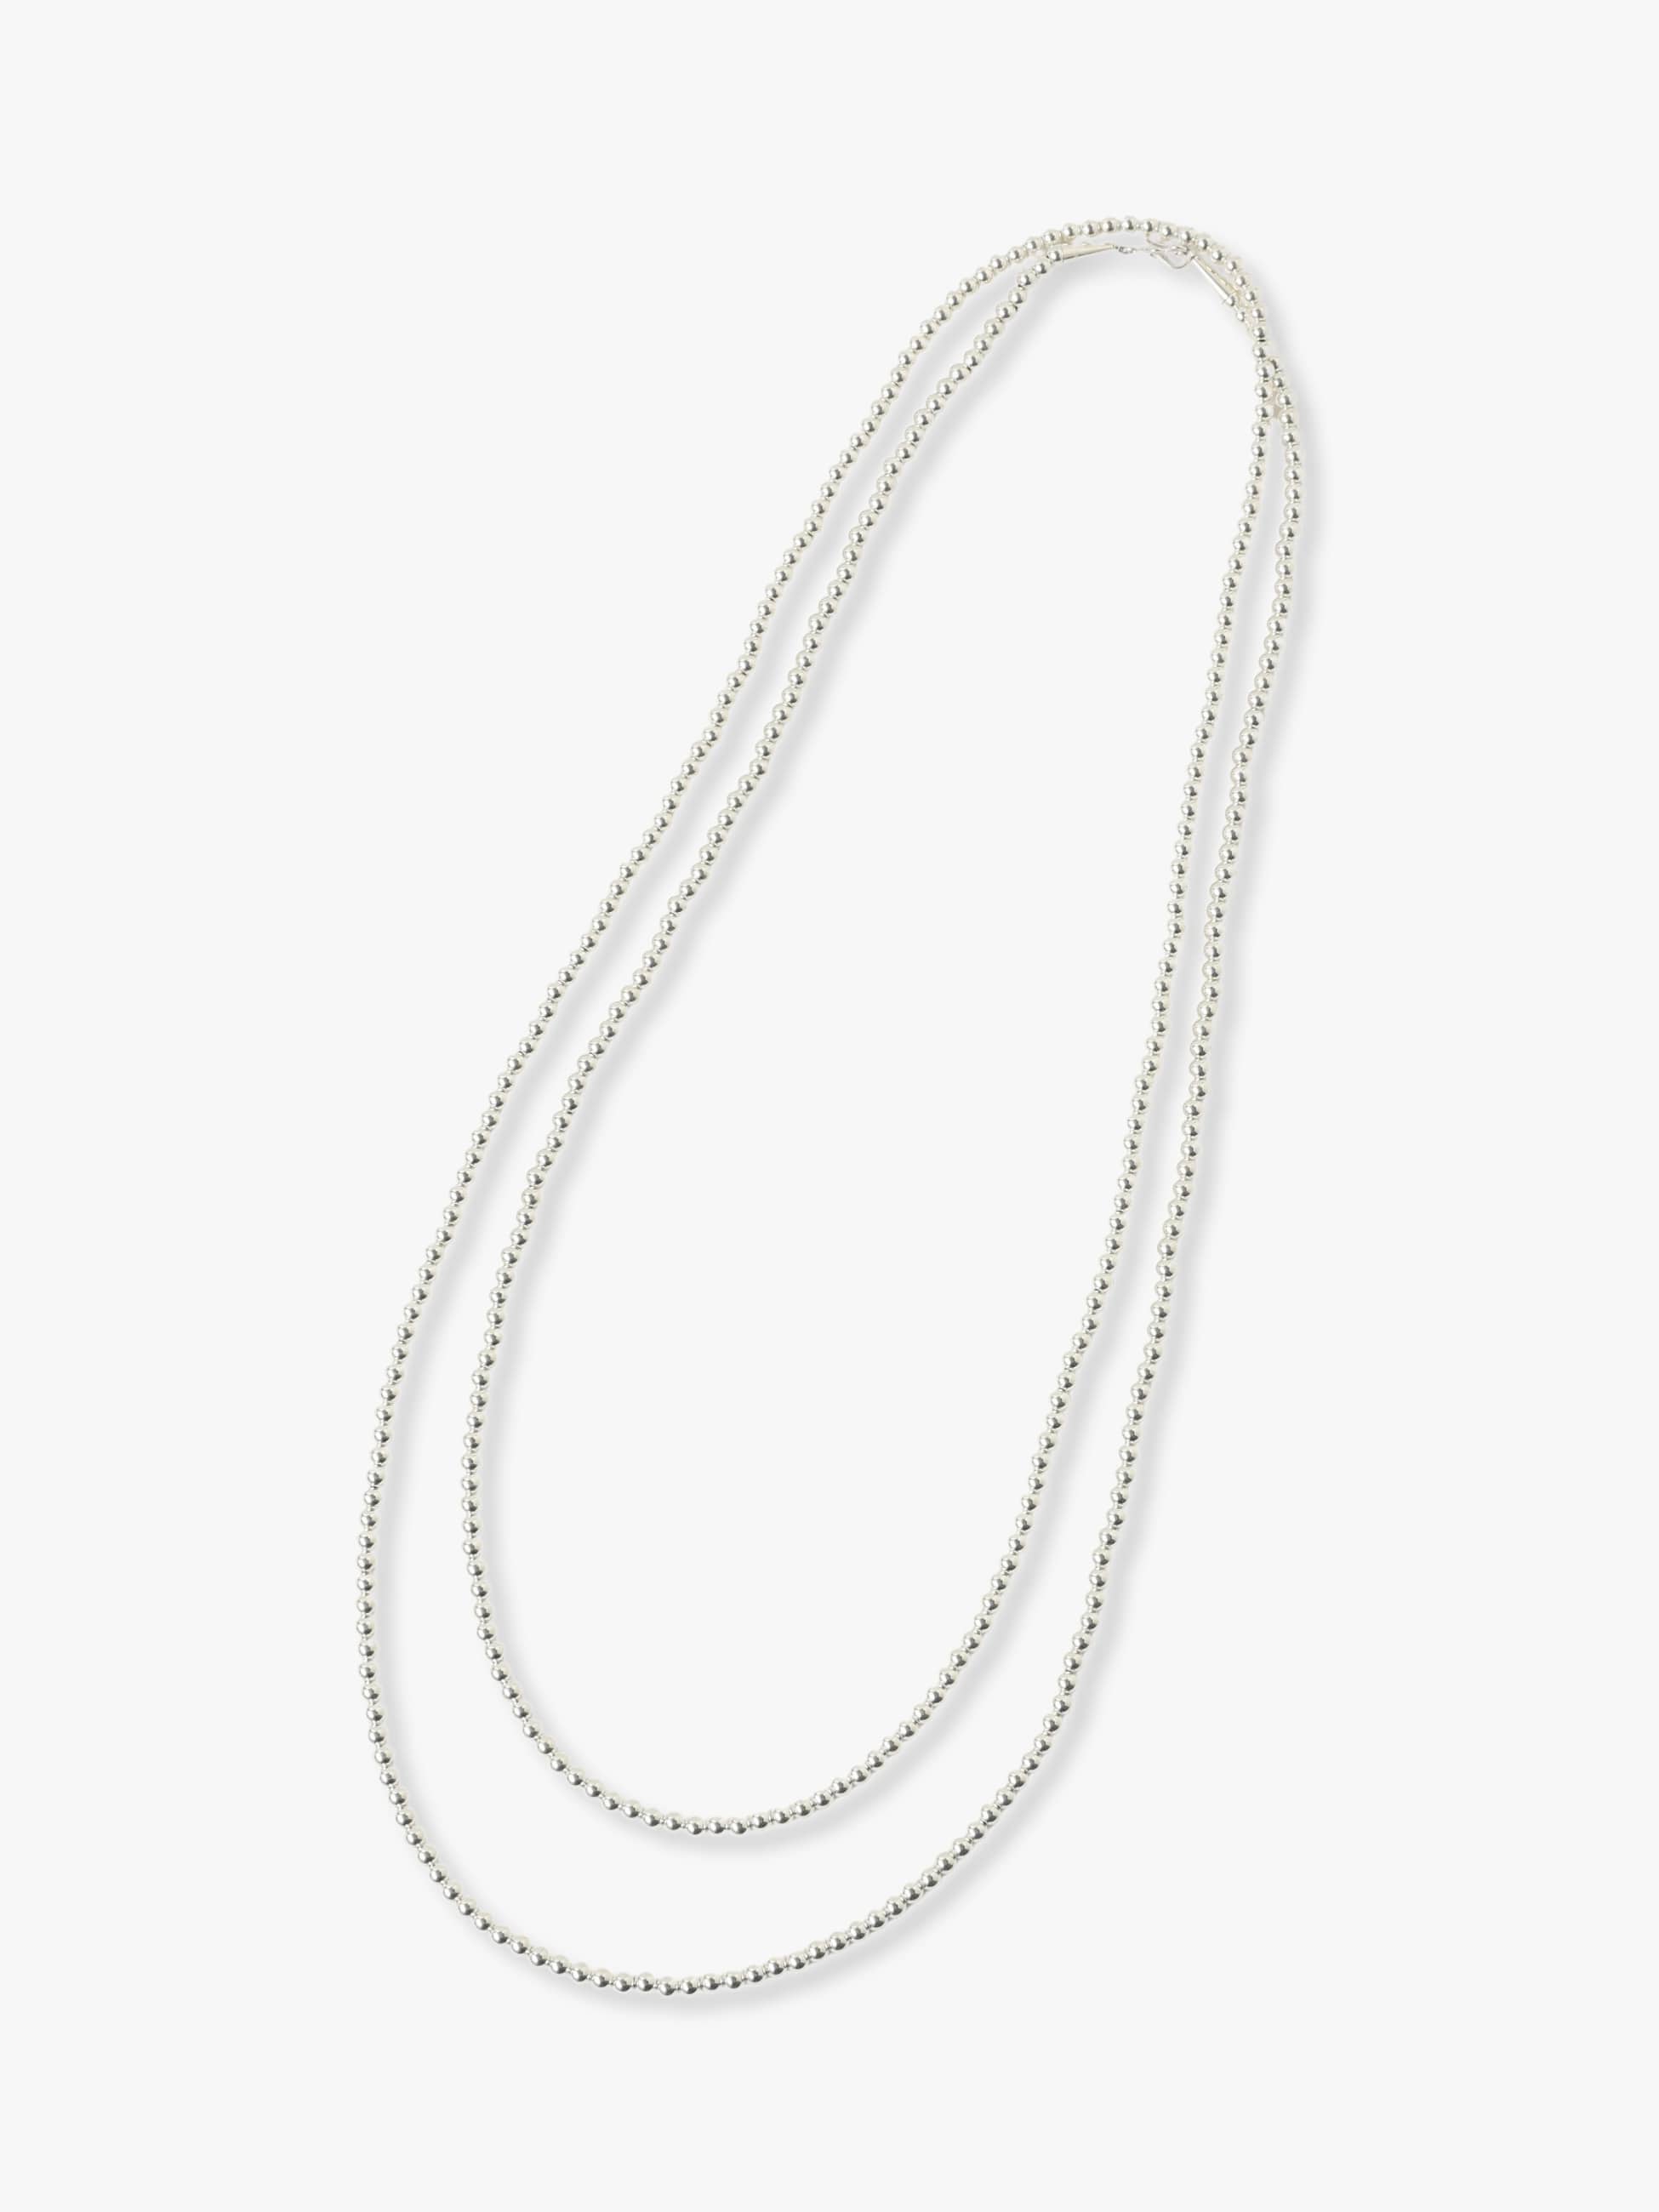 Silver Beads Necklace (5mm×71)